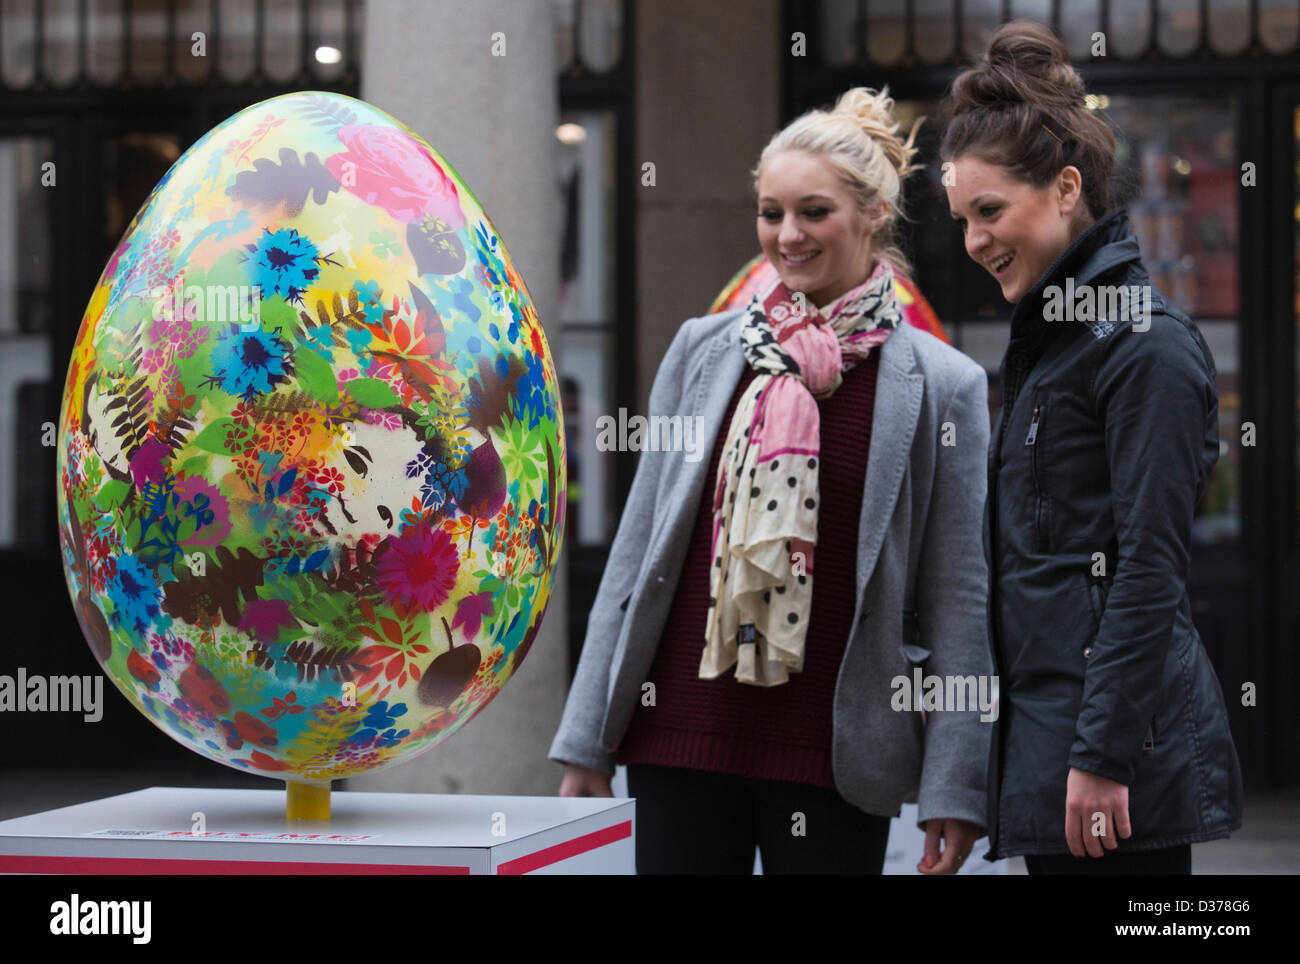 London, UK. 12th February 2013.  Veronica Fulton, 21, and Imogen Money, 22, from London admire the eggs. Over 100 giant Easter eggs designed by artists and designers were unveiled today in Covent Garden Piazza, London, to launch The Lindt Big Egg Hunt in support for the charity 'Action for Children'. For six weeks, from 12 February to 1 April 2013, giant Easter eggs will tour the country, from London's Covent Garden to Birmingham, Liverpool, Manchester, Glasgow and back to London in time for Easter. Photo: Nick Savage/Alamy Live News Stock Photo